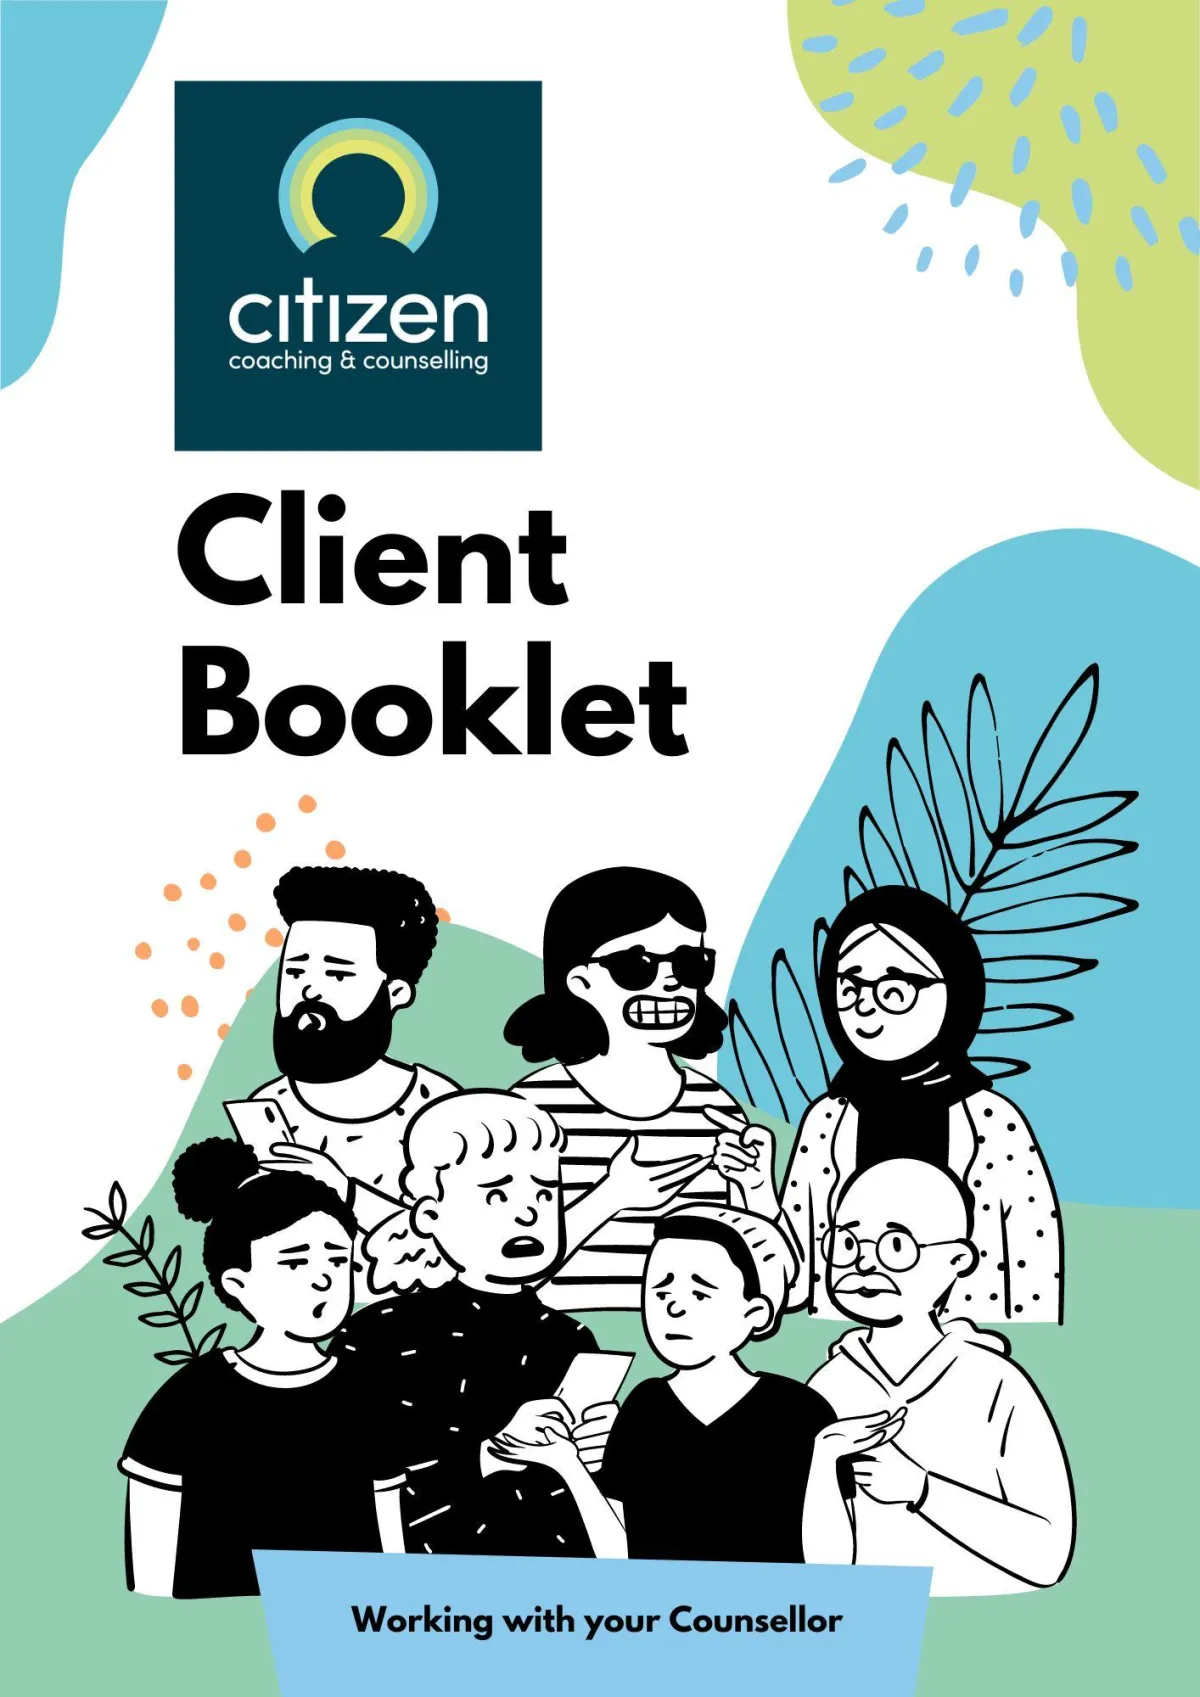 Citizen Coaching and Counselling client Booklet download